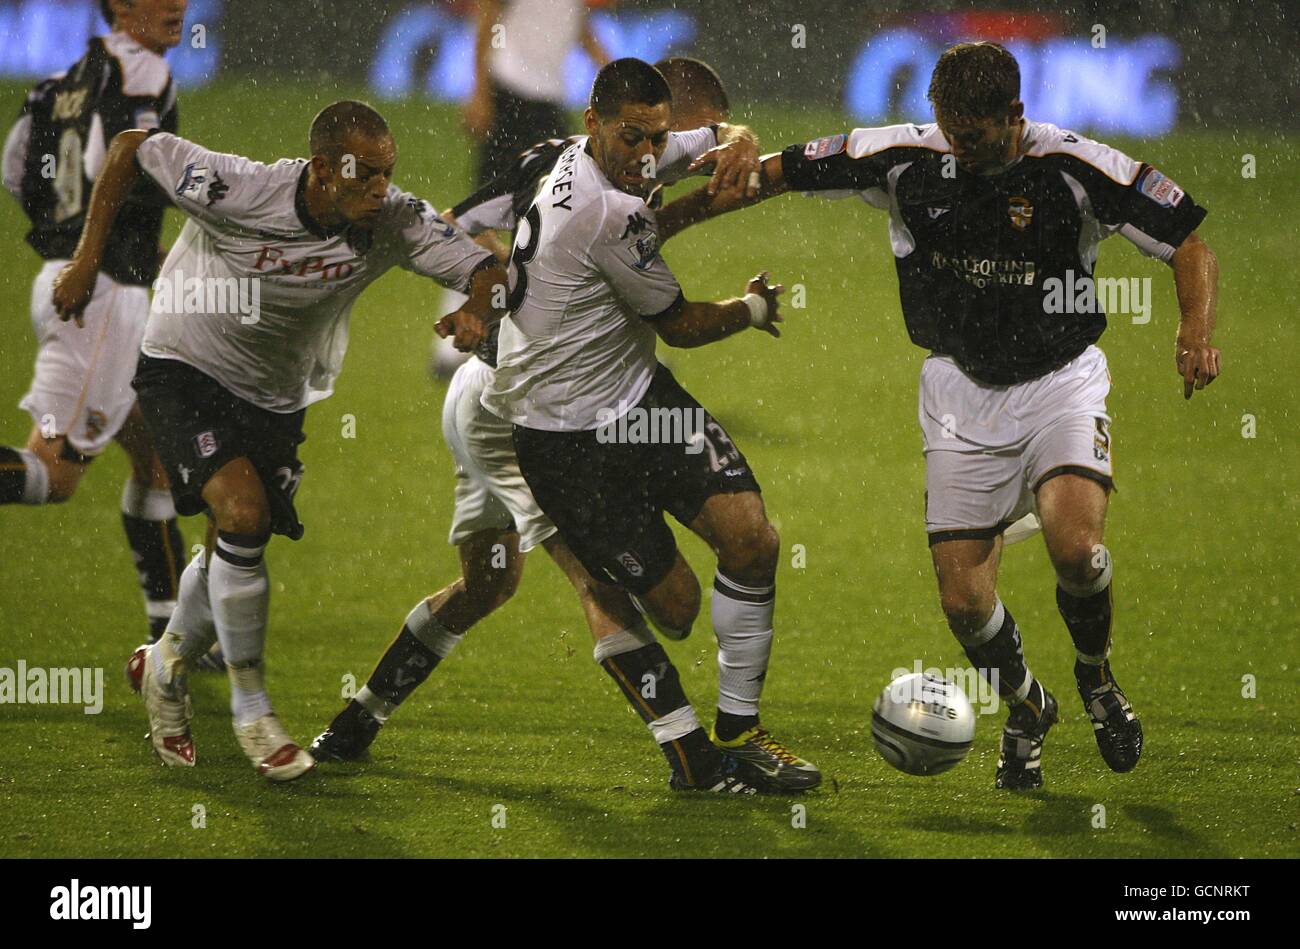 Fulham Clint Dempsey (centre) is helped by team mate Bobby Zamora as he battles for the ball with Port Vale's Lee Collins Stock Photo